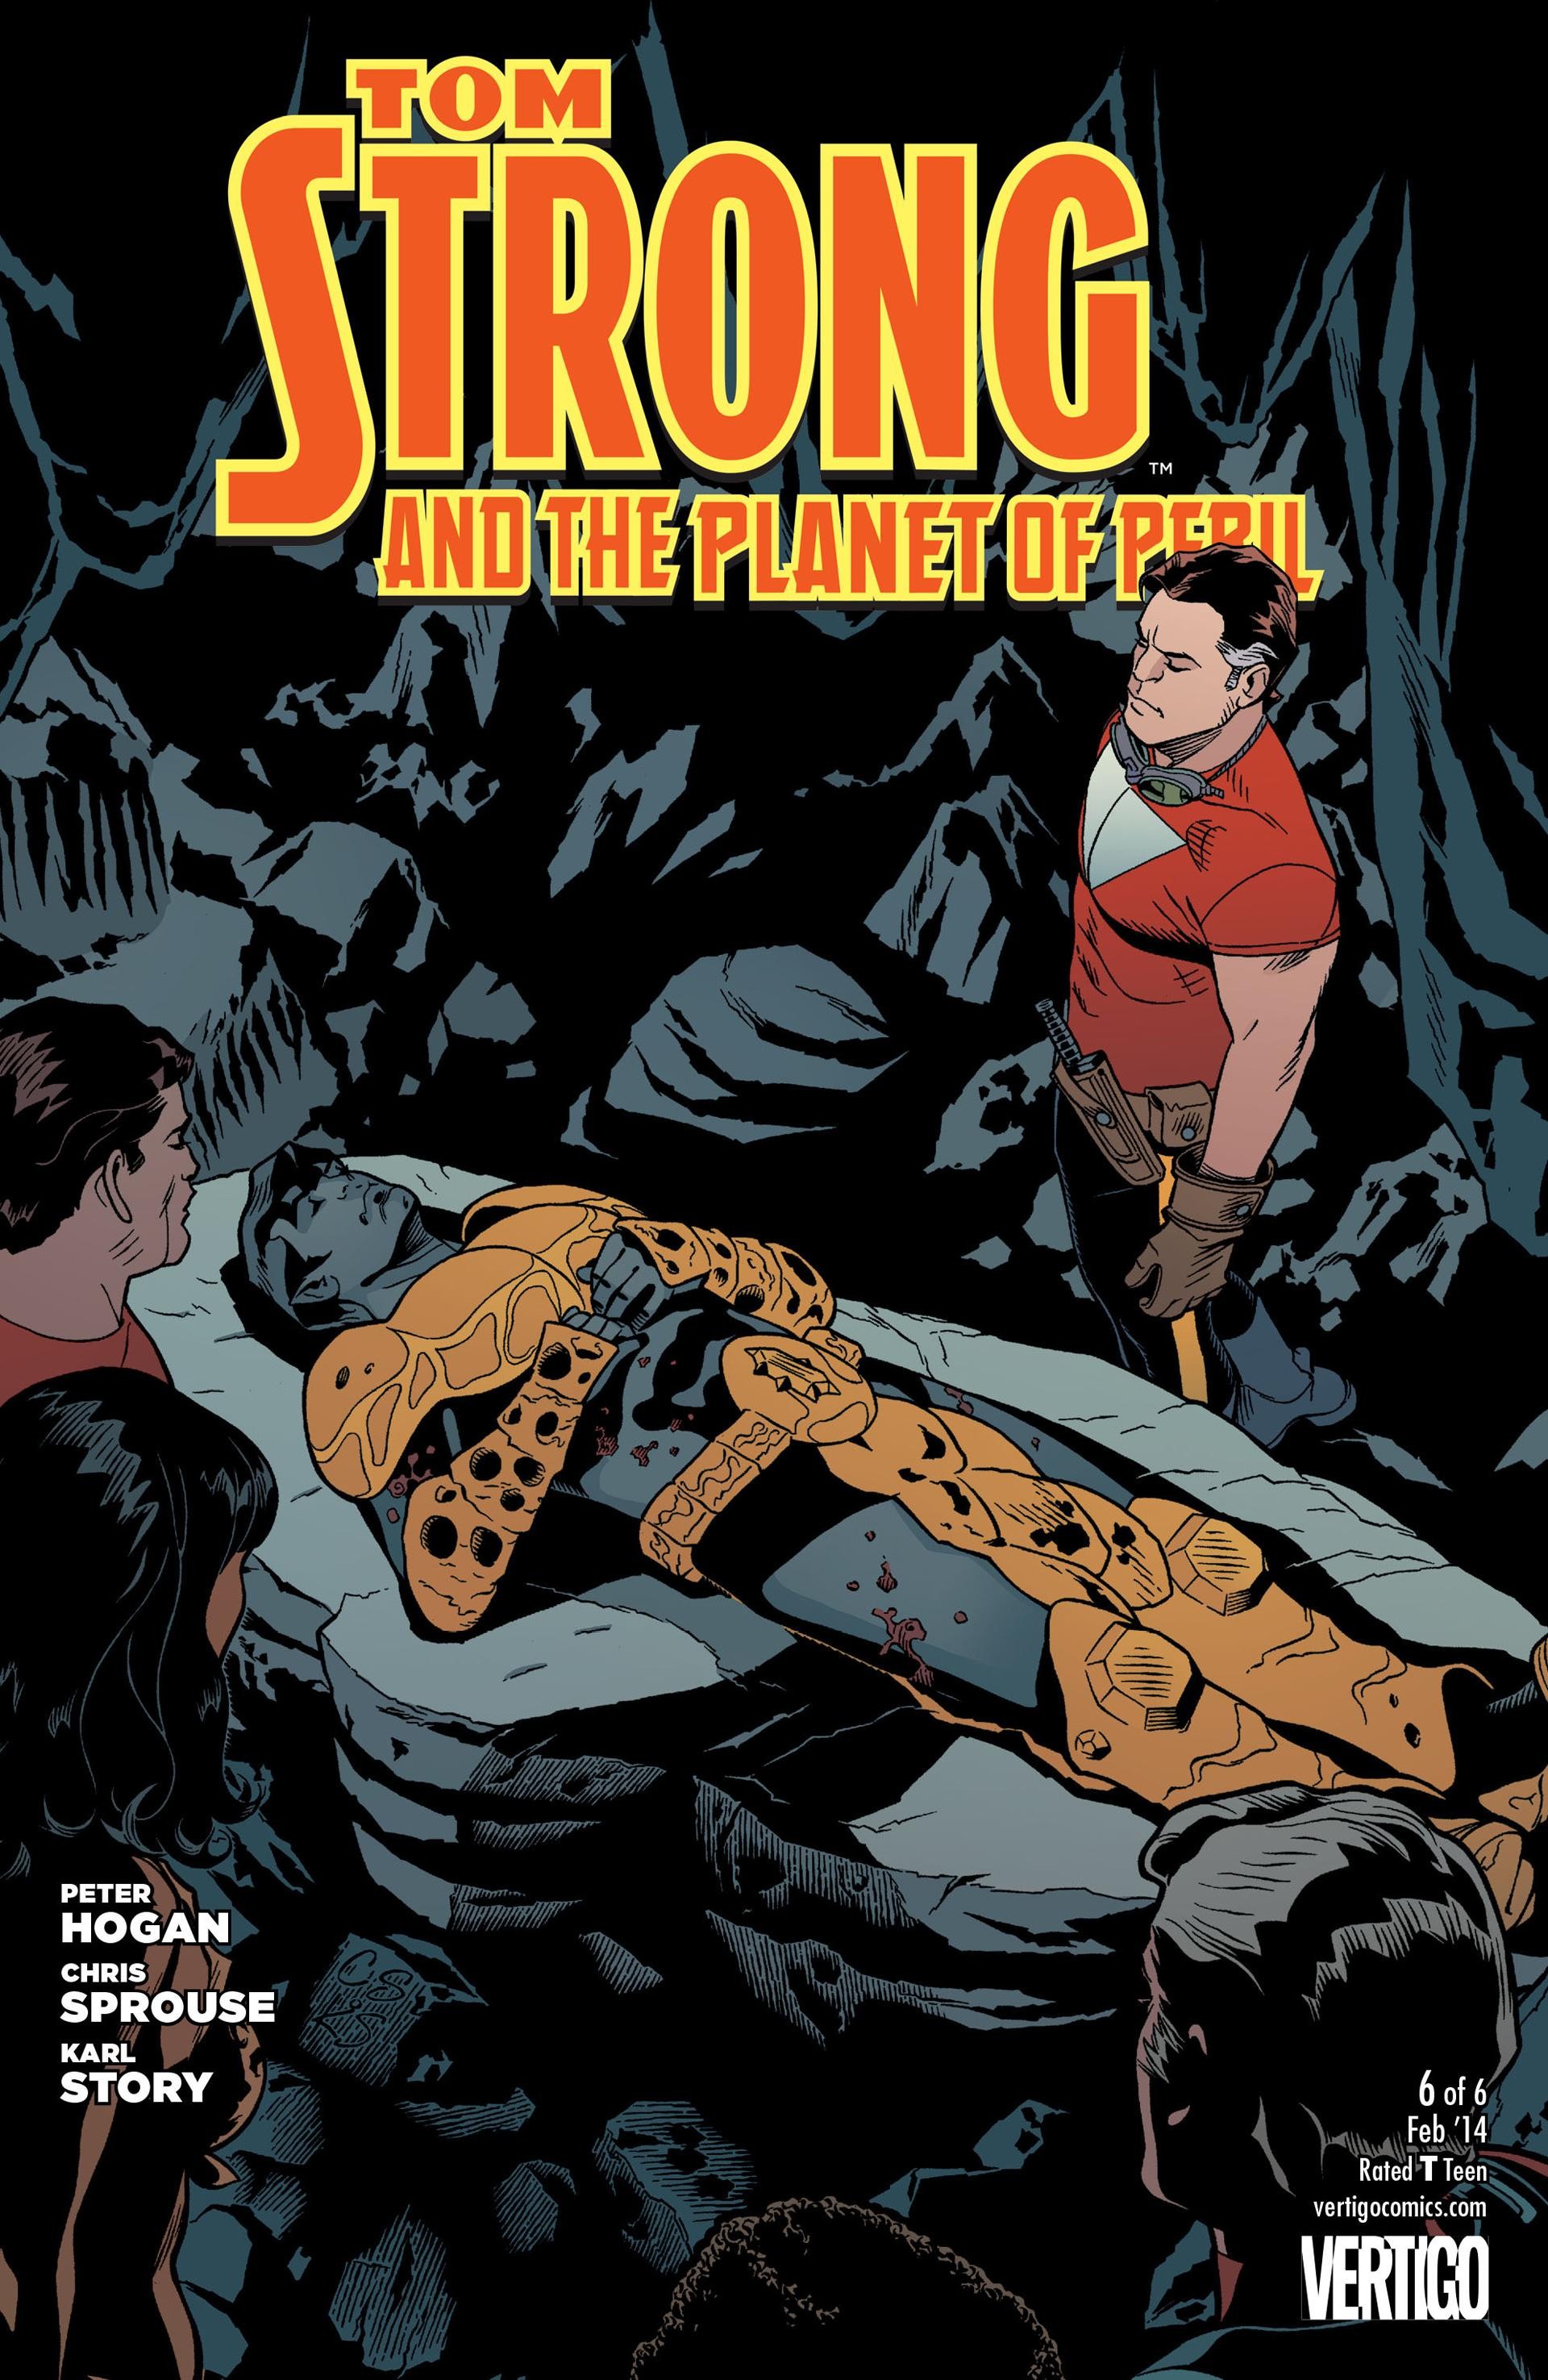 Tom Strong and the Planet of Peril Vol. 1 #6